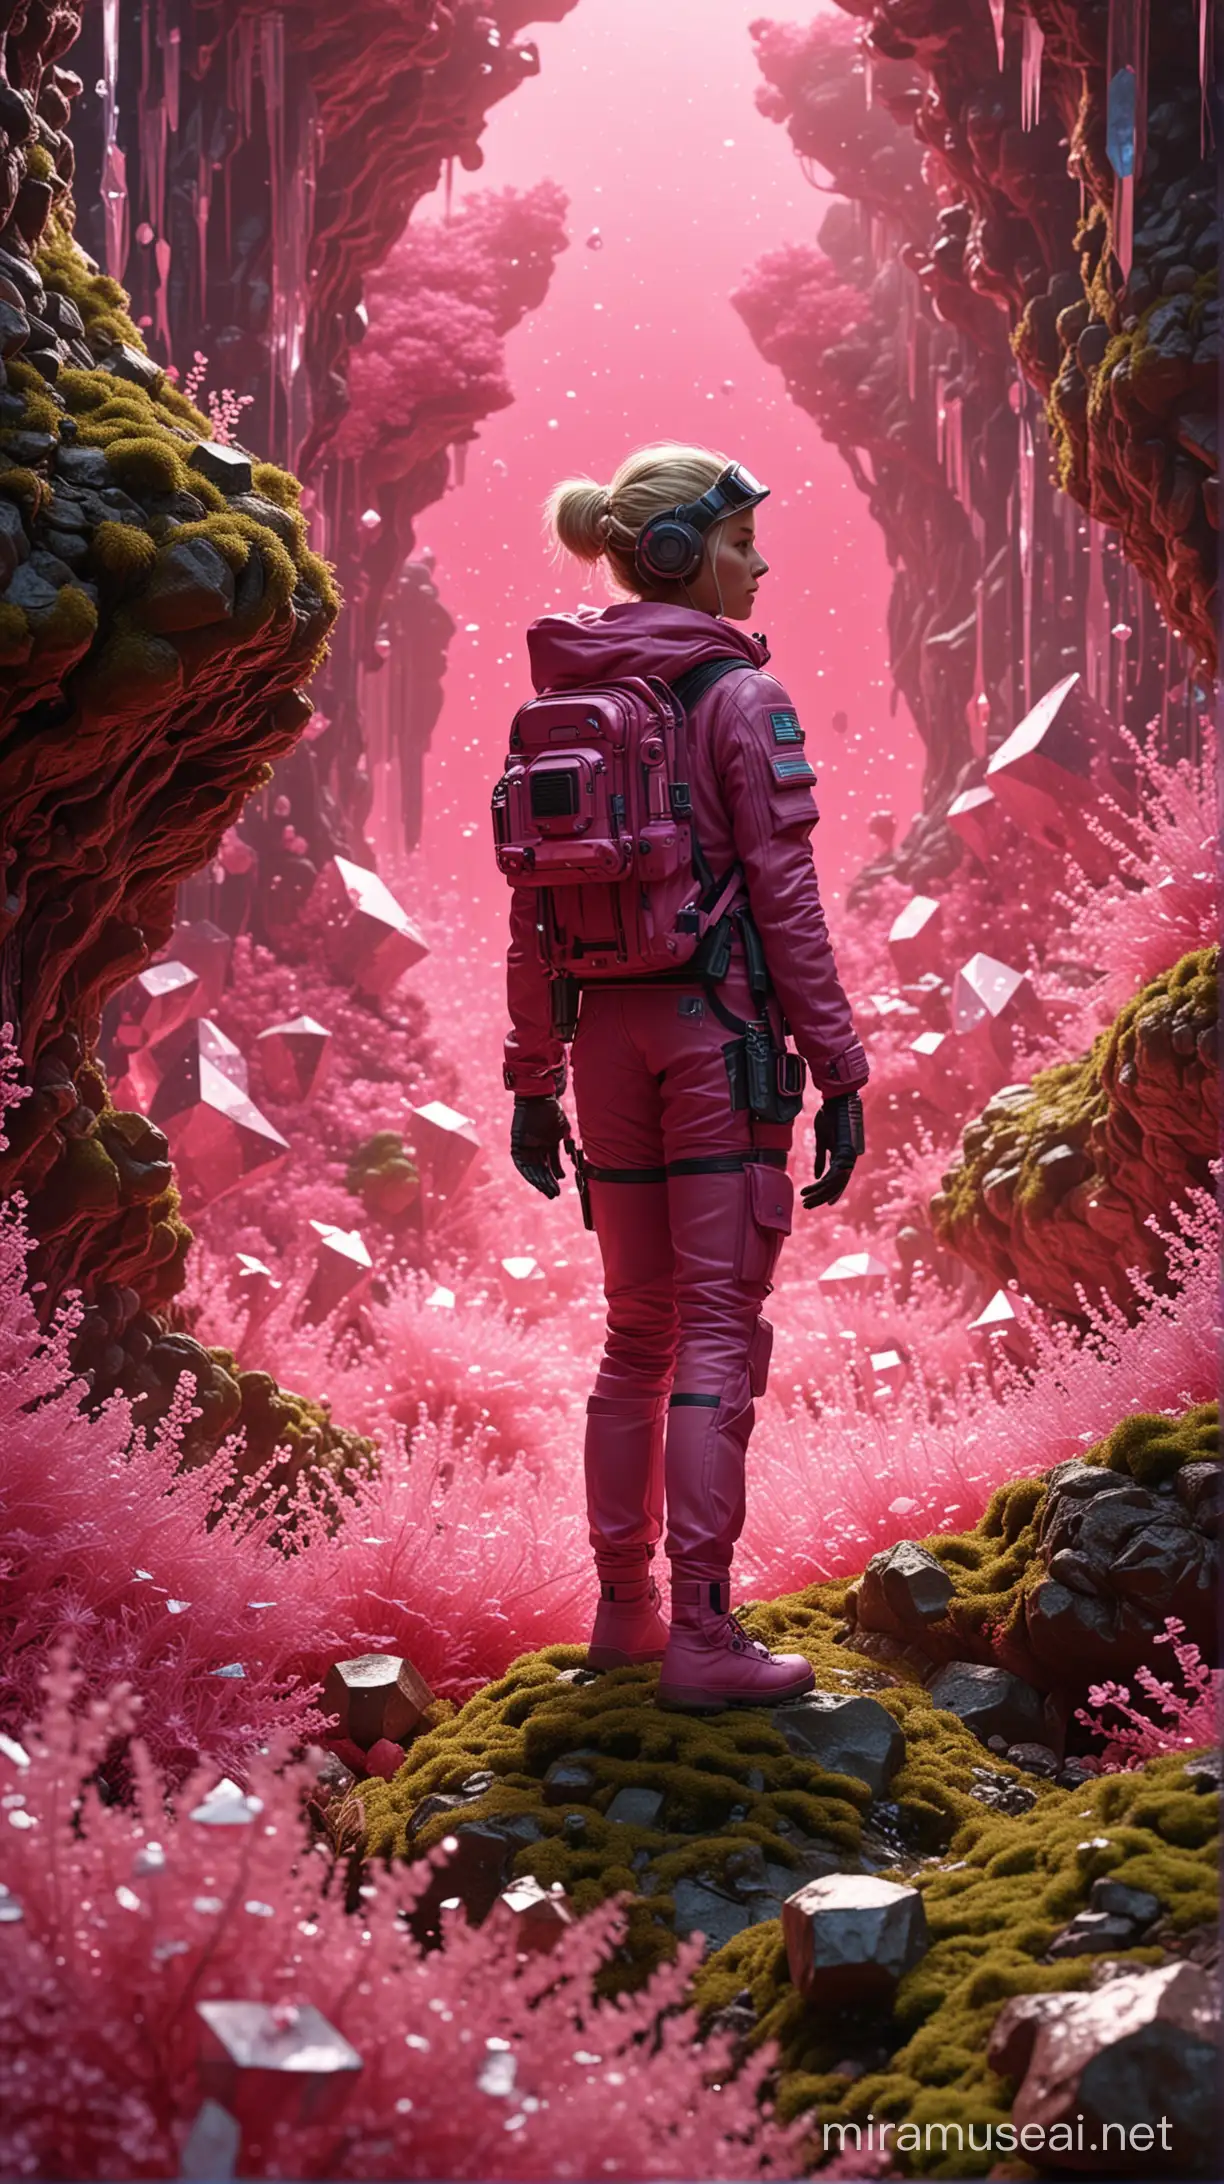 Futuristic Explorer Amid Glowing Pink Crystals and Luminous Moss